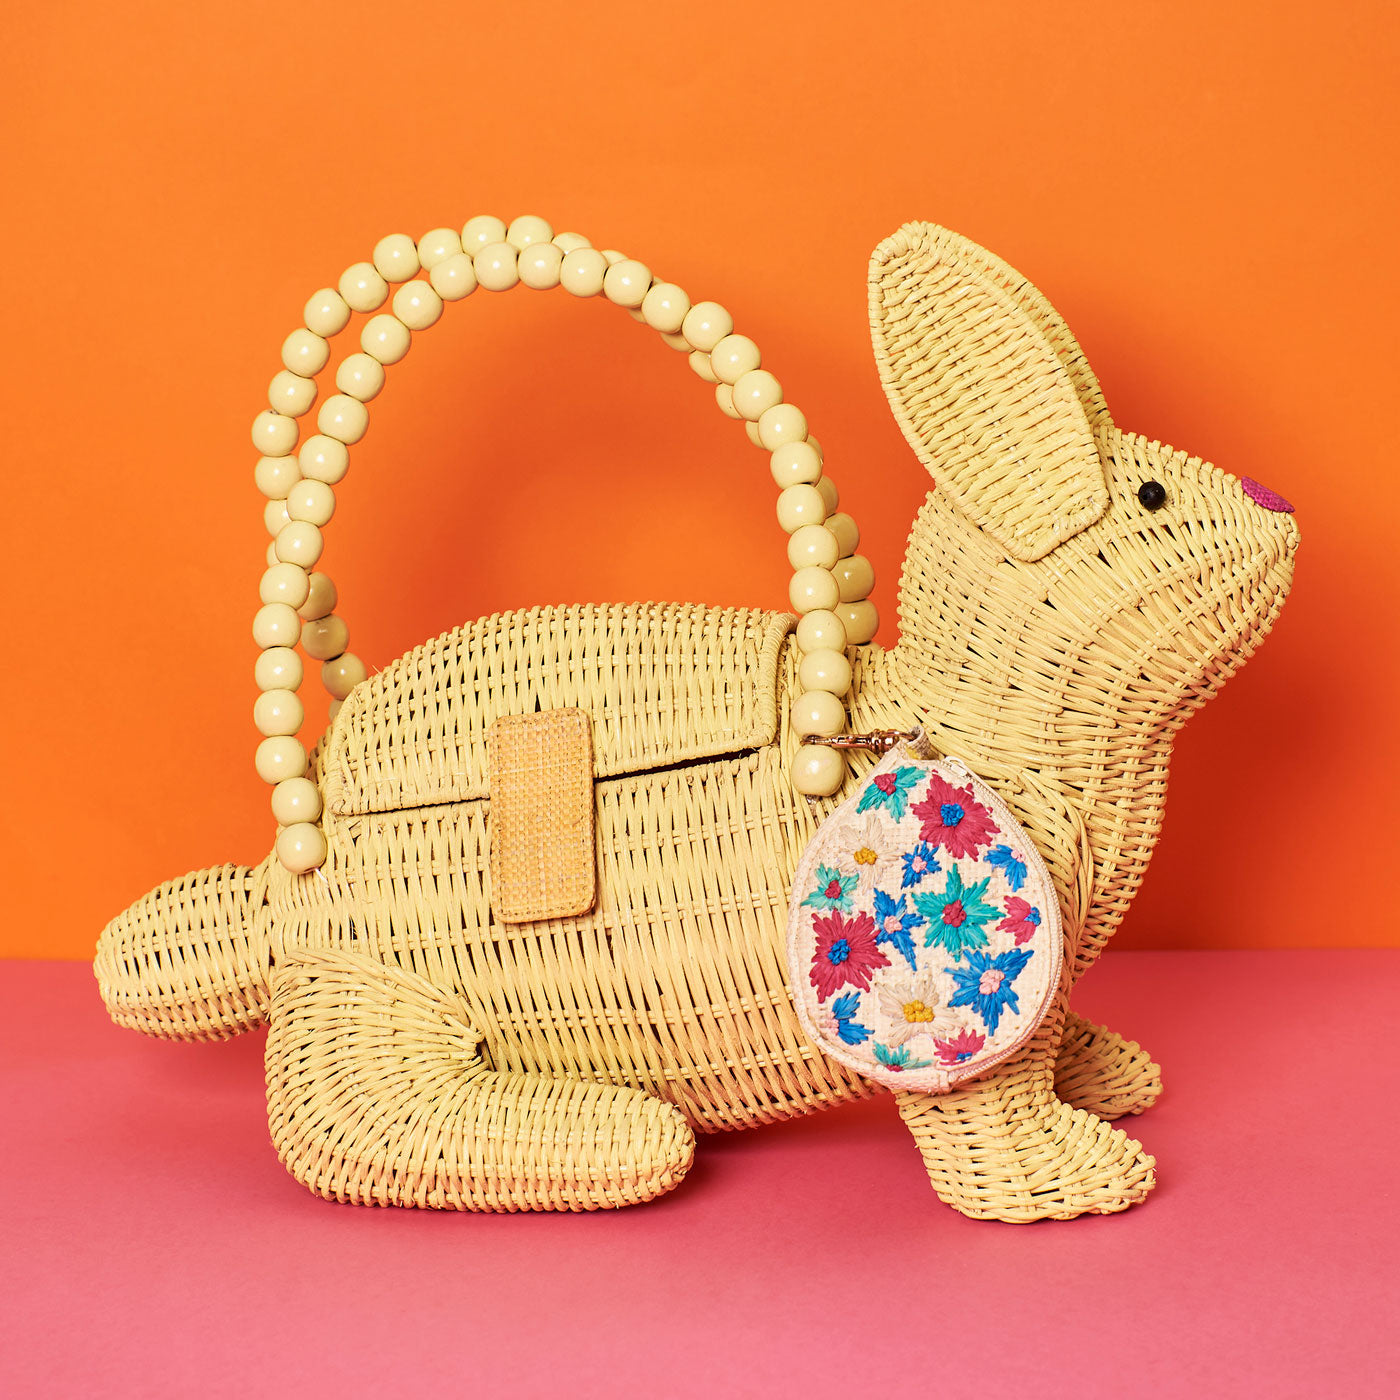 Wicker Darling's Easter the rabbit purse 